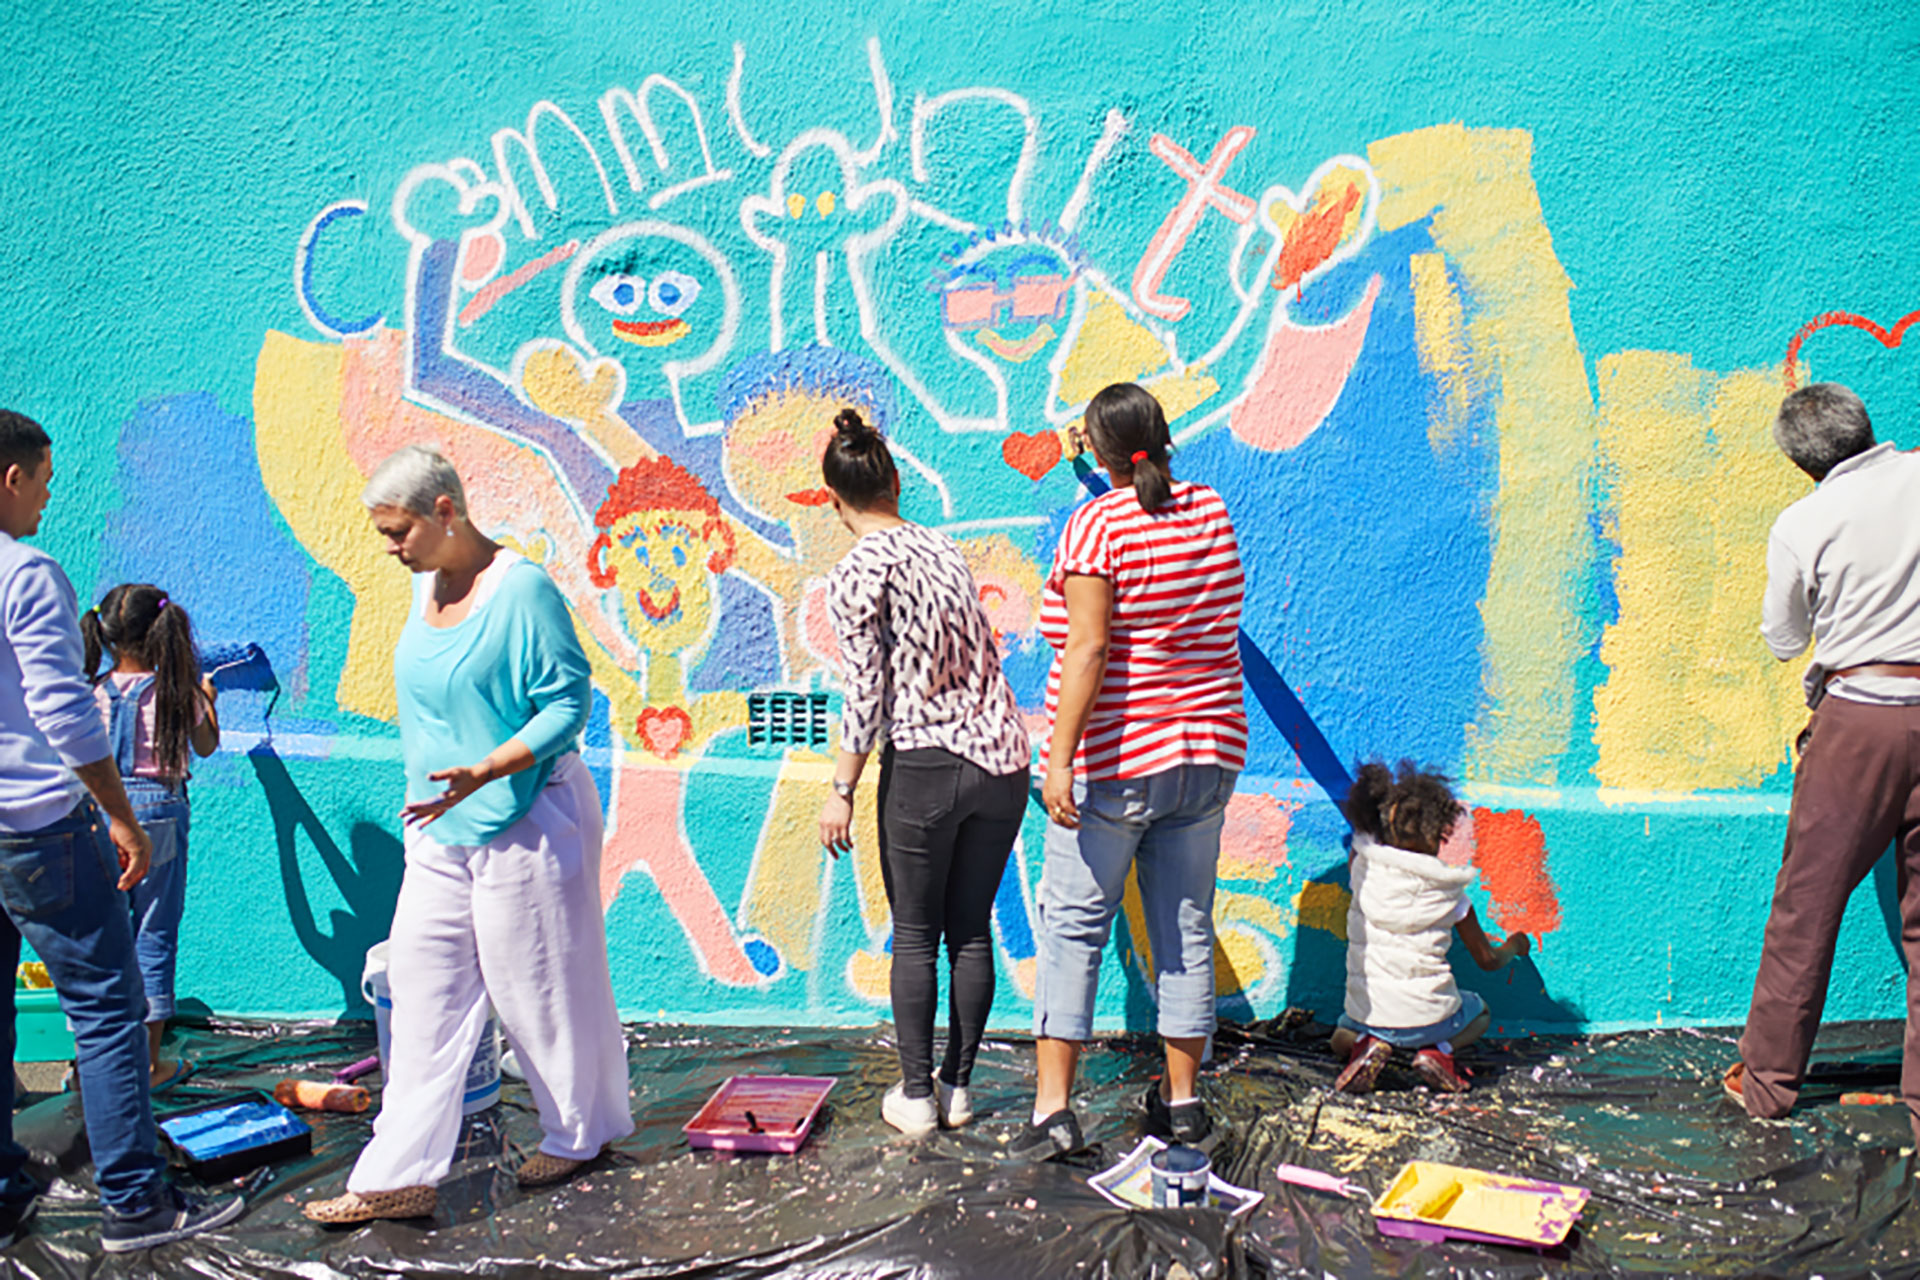 A group of people painting a community mural on the side of a building.